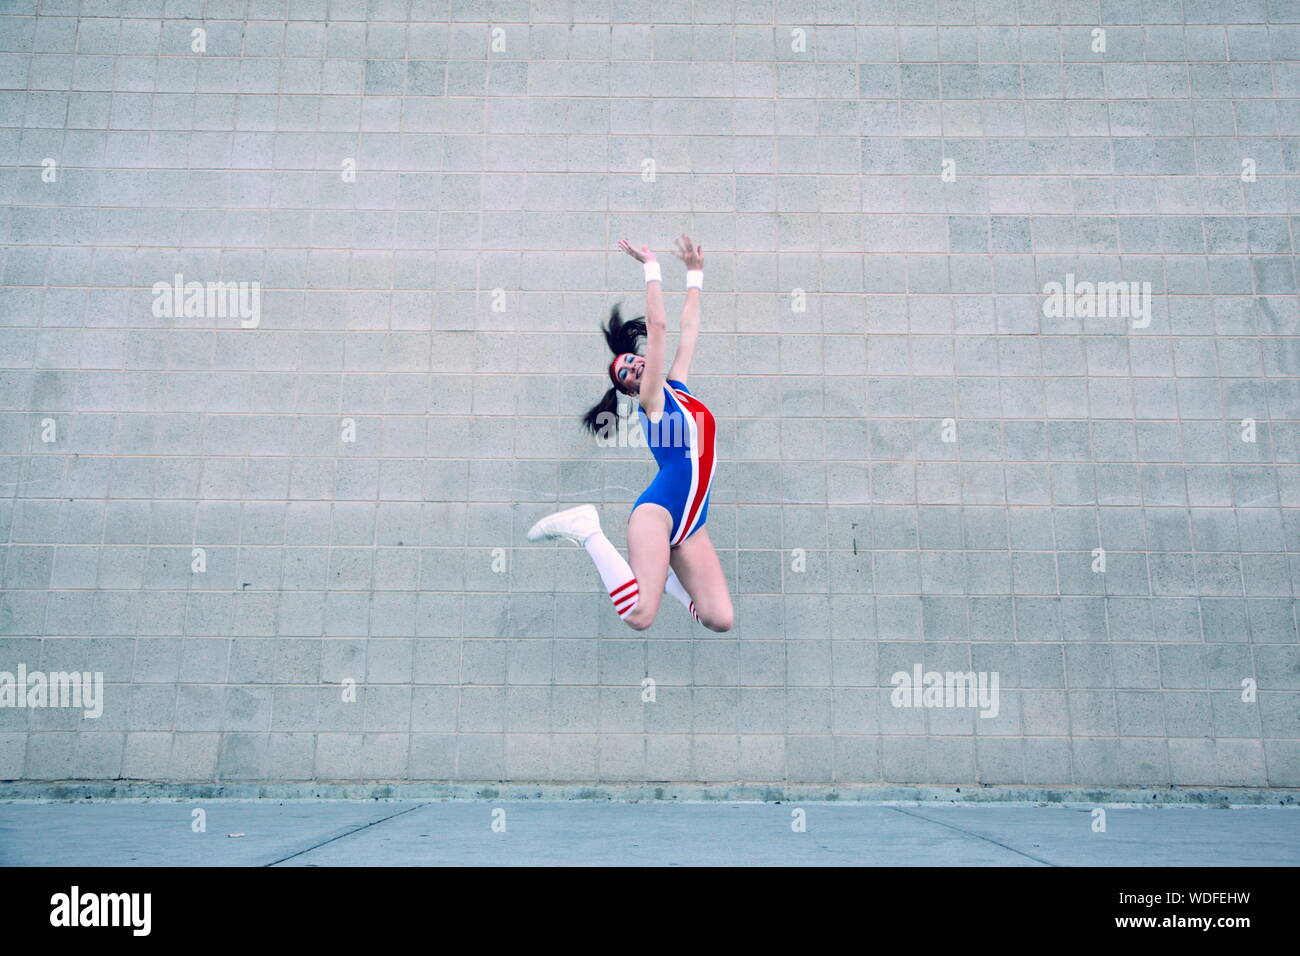 Full Length Of Cheerful Female Gymnast In Leotard Jumping Against Wall Stock Photo